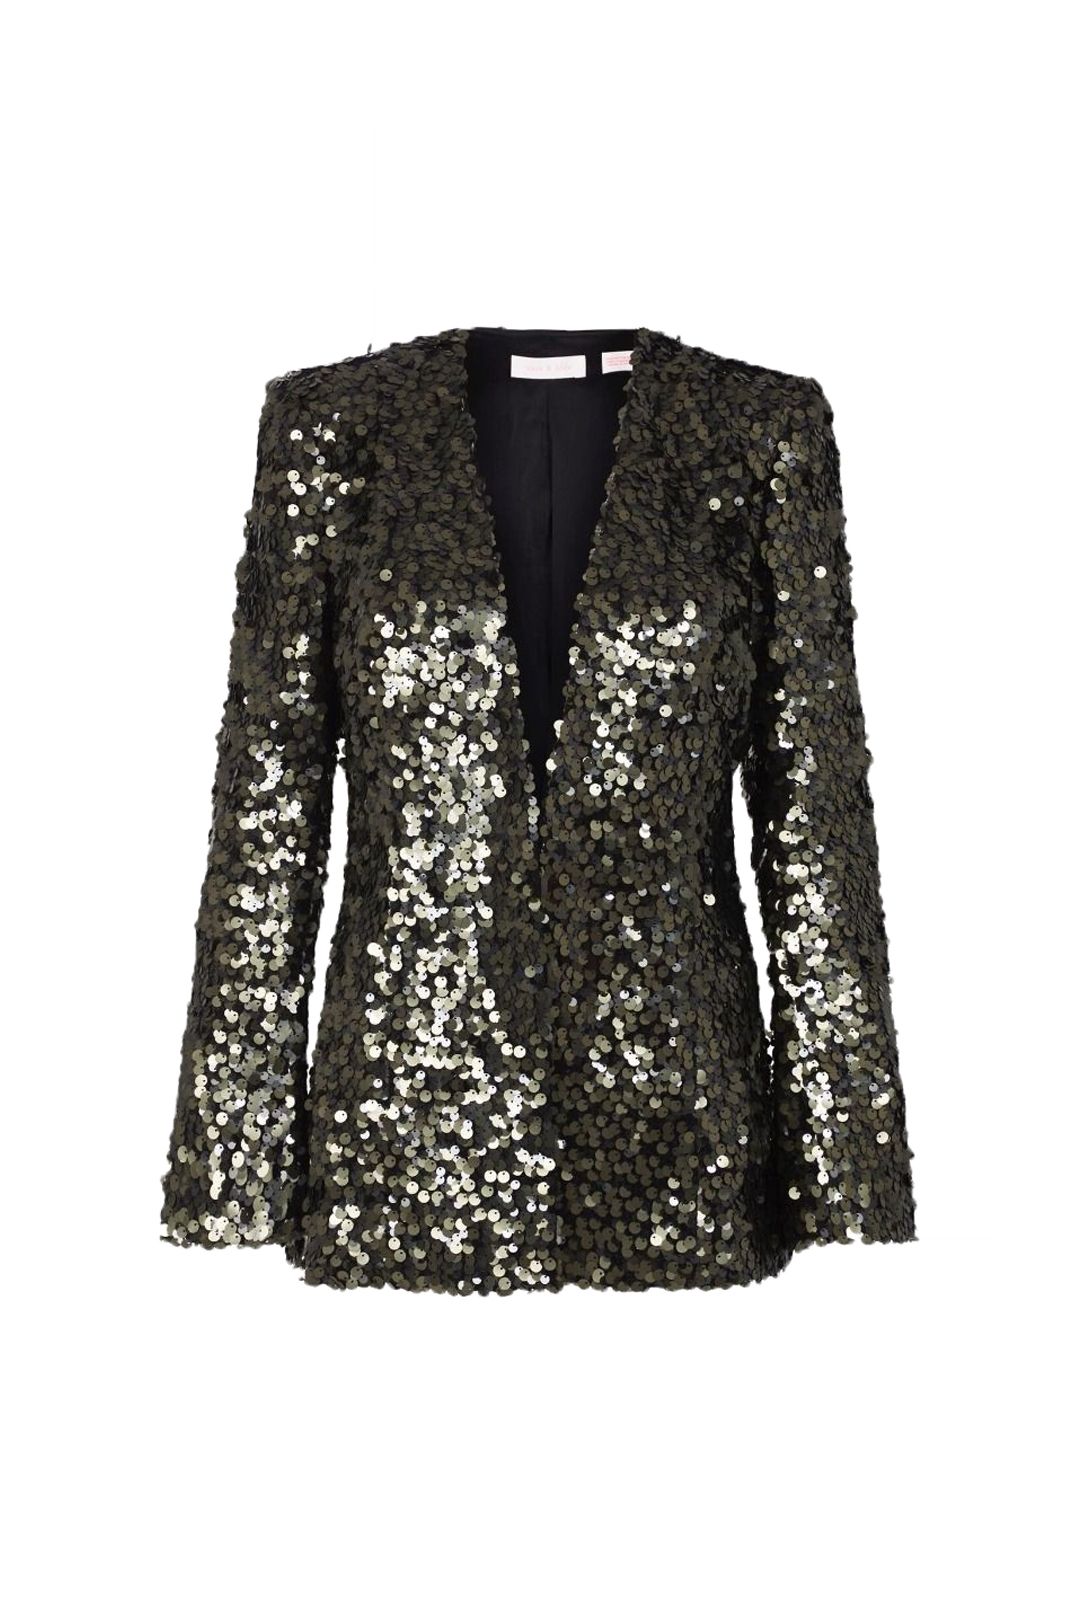 Sass and Bide - The Olive Branch Jacket - Olive - Ghost Front